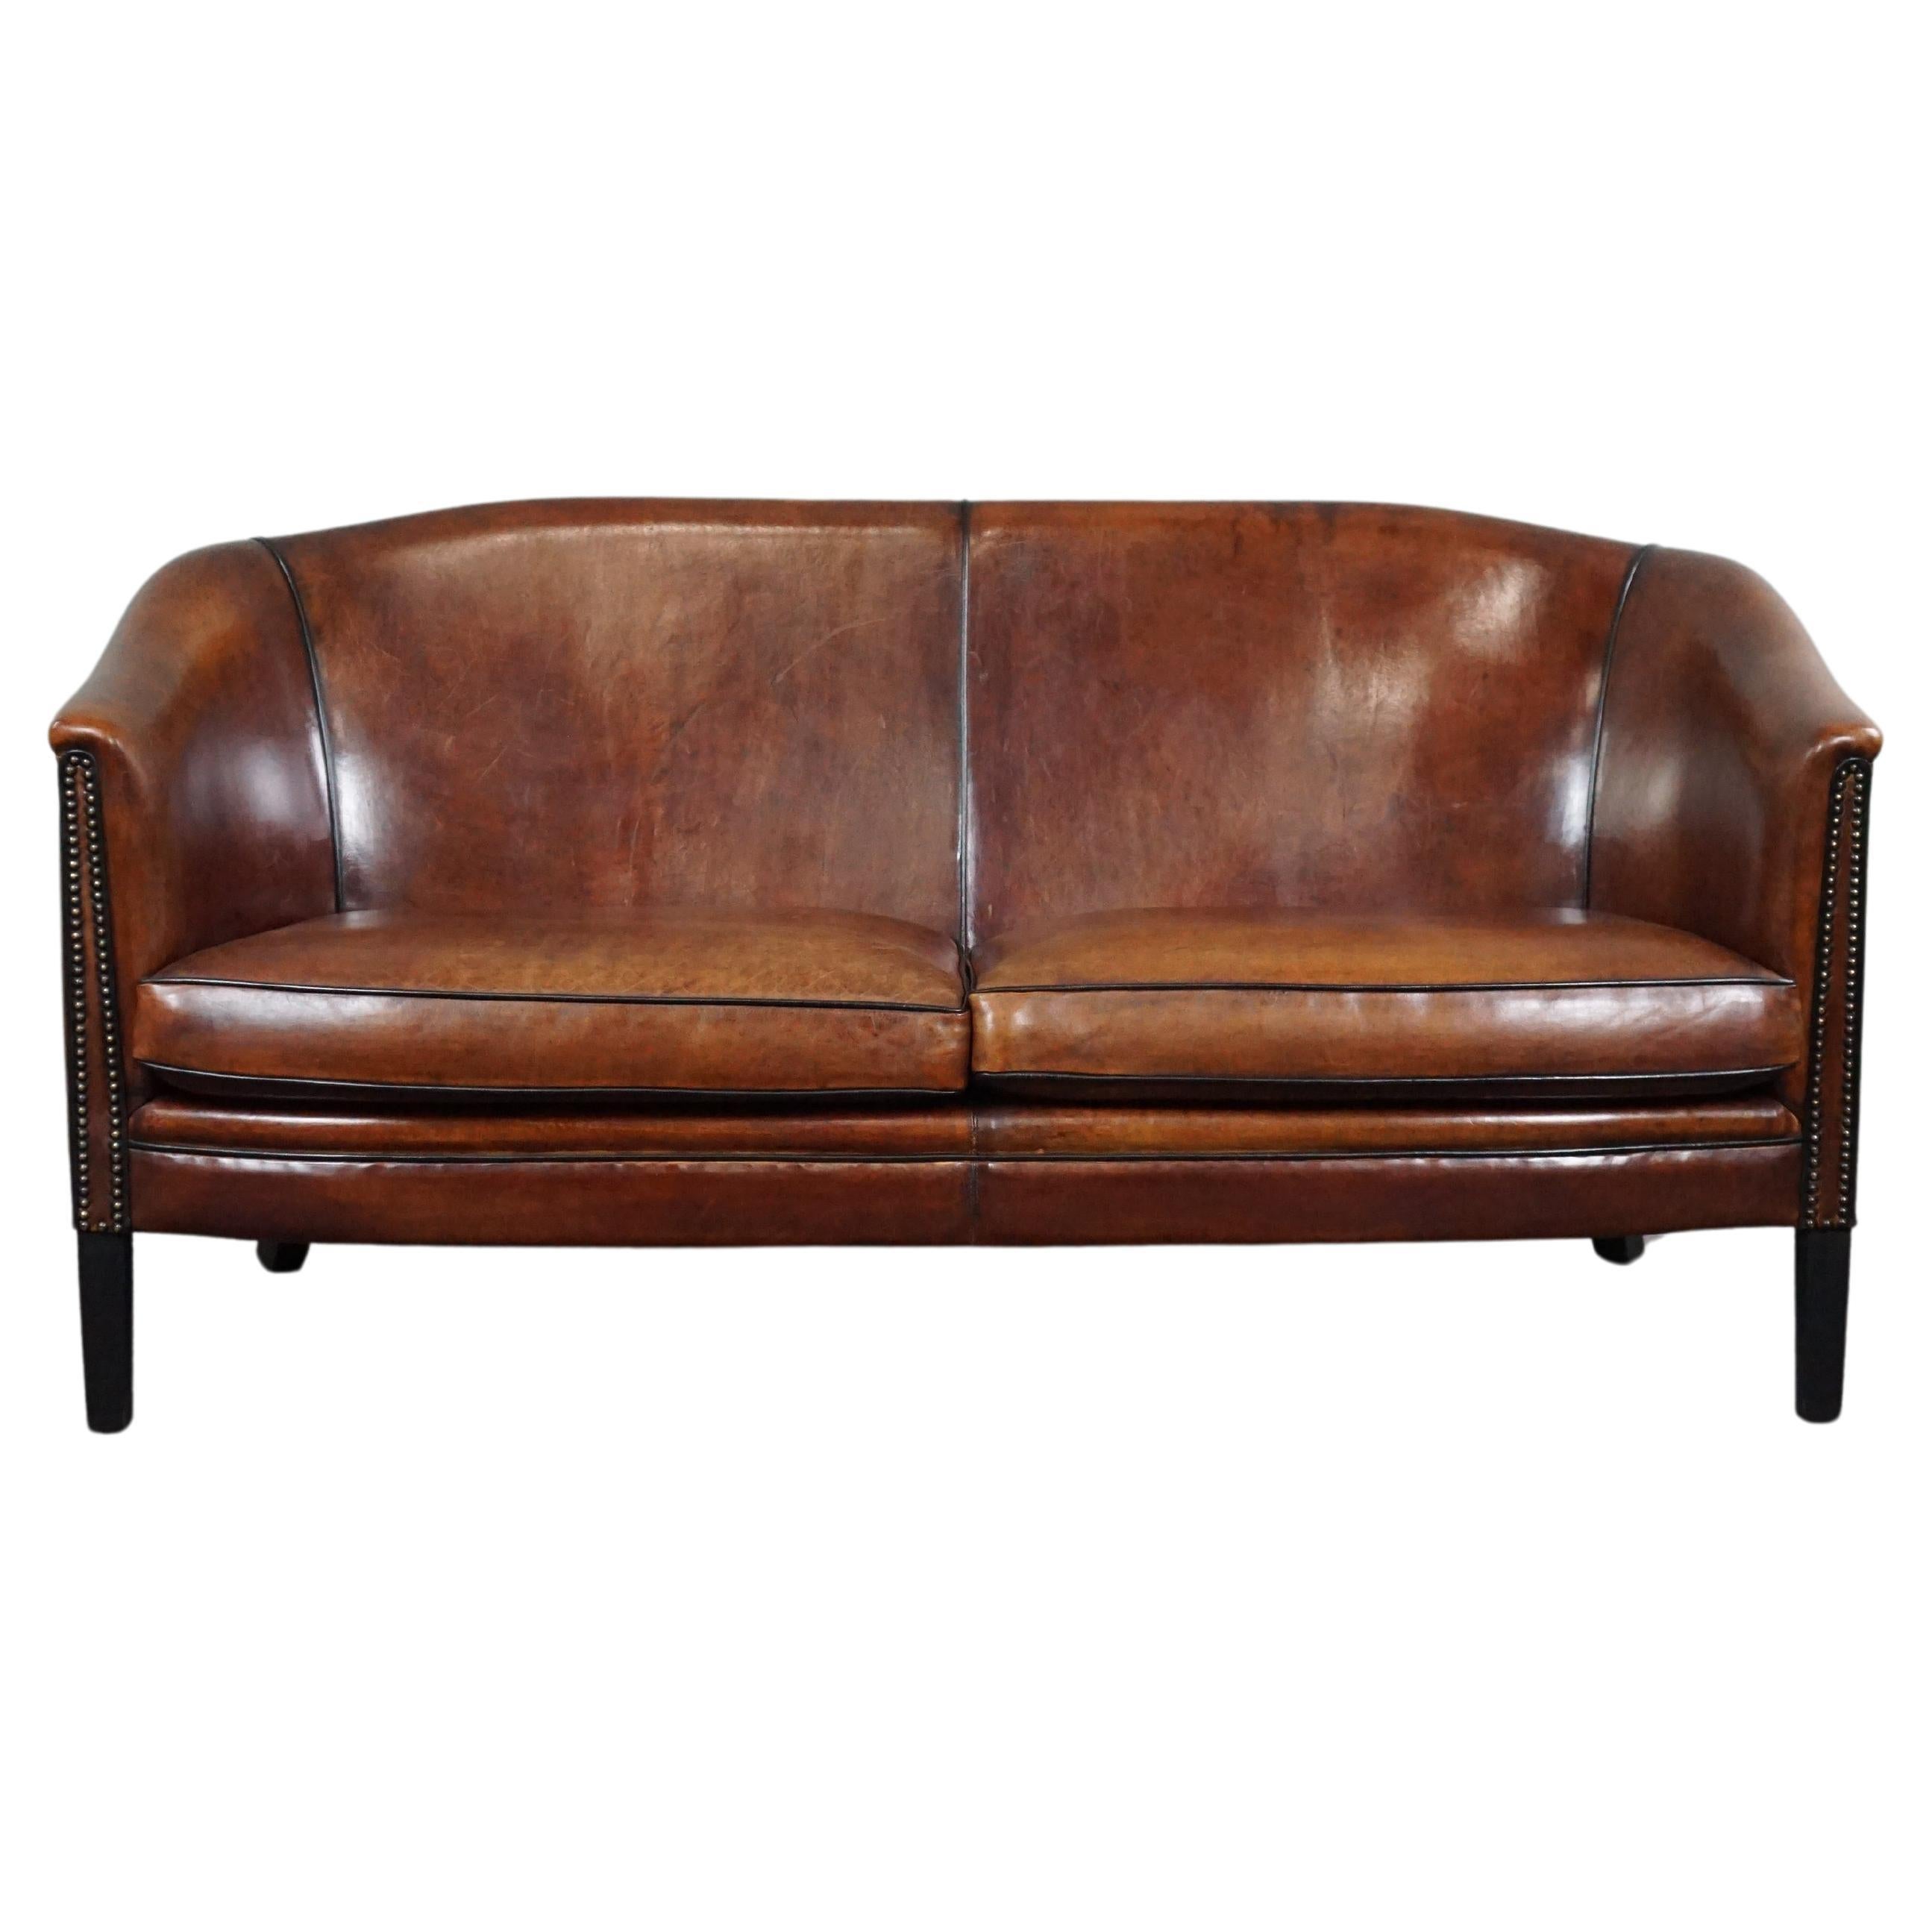 Gracefully shaped sheep leather sofa finished with black piping, spacious 2 seat